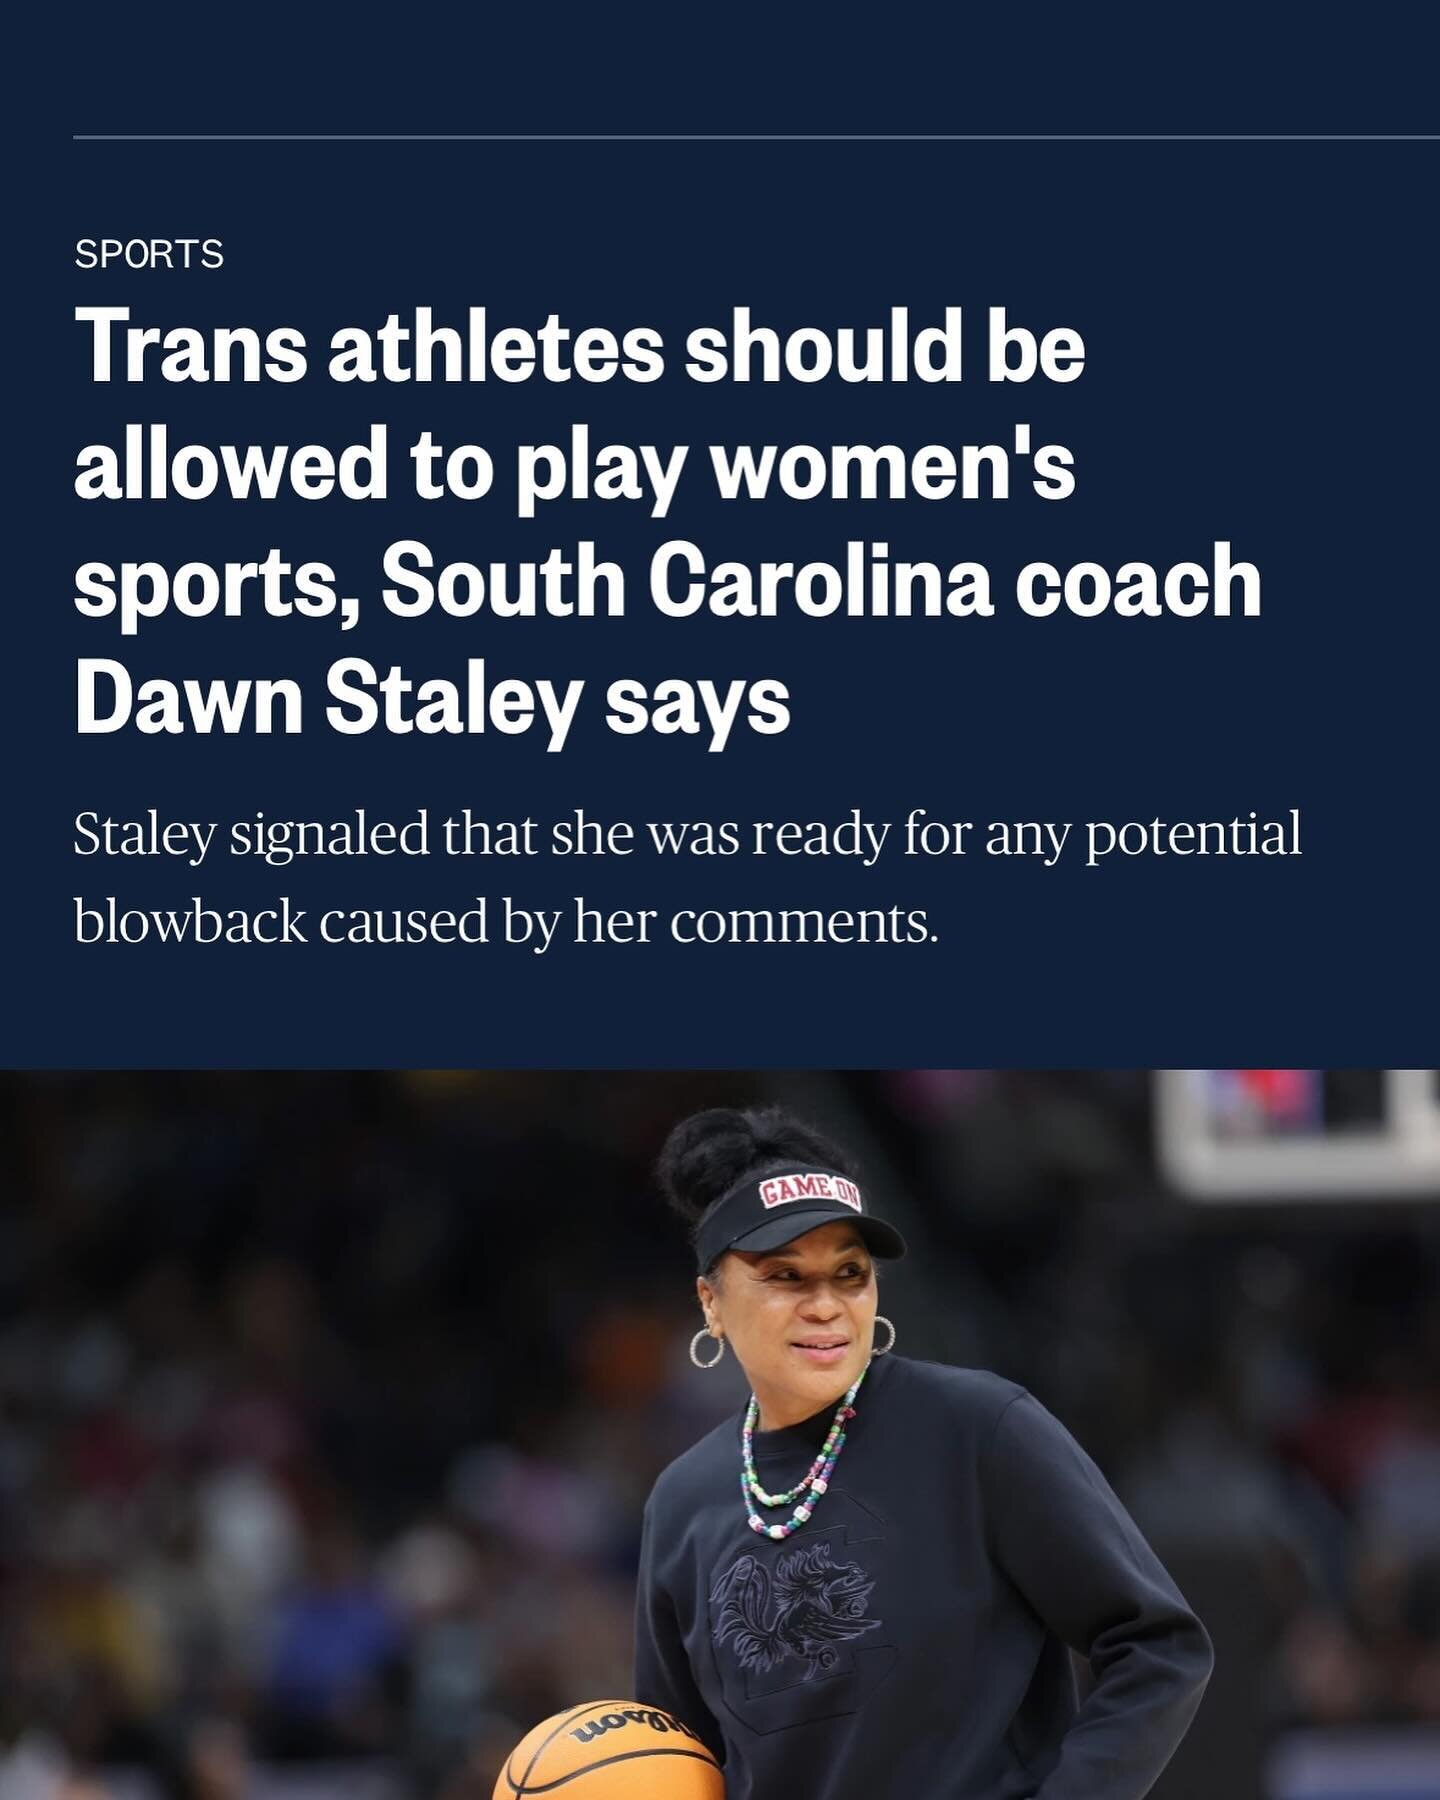 Many thanks to Dawn Staley for taking a stance on trans rights in sports. It&rsquo;s not easy and the temptation to avoid was probably strong. You stood up for what you believe and we appreciate you!! 
❤️🏀🏳️&zwj;⚧️

https://www.nbcnews.com/news/amp